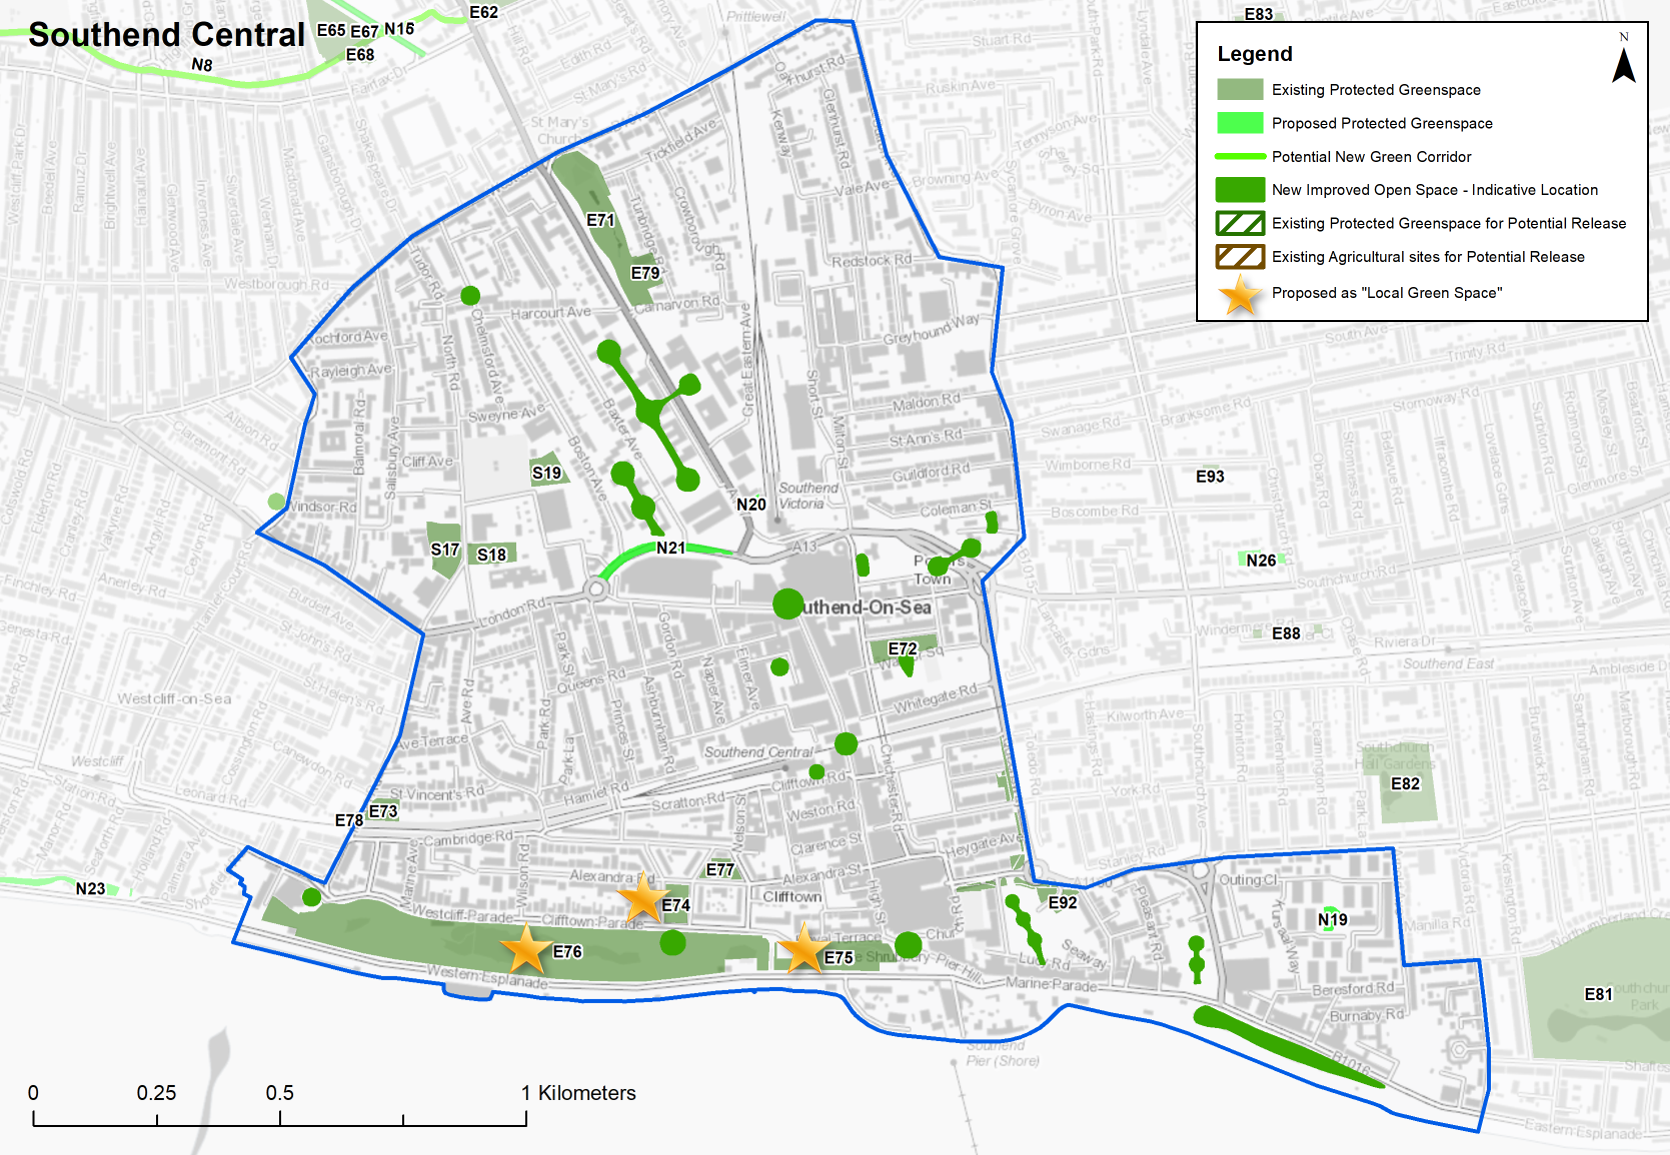 Map showing Green Space in Southend Central area